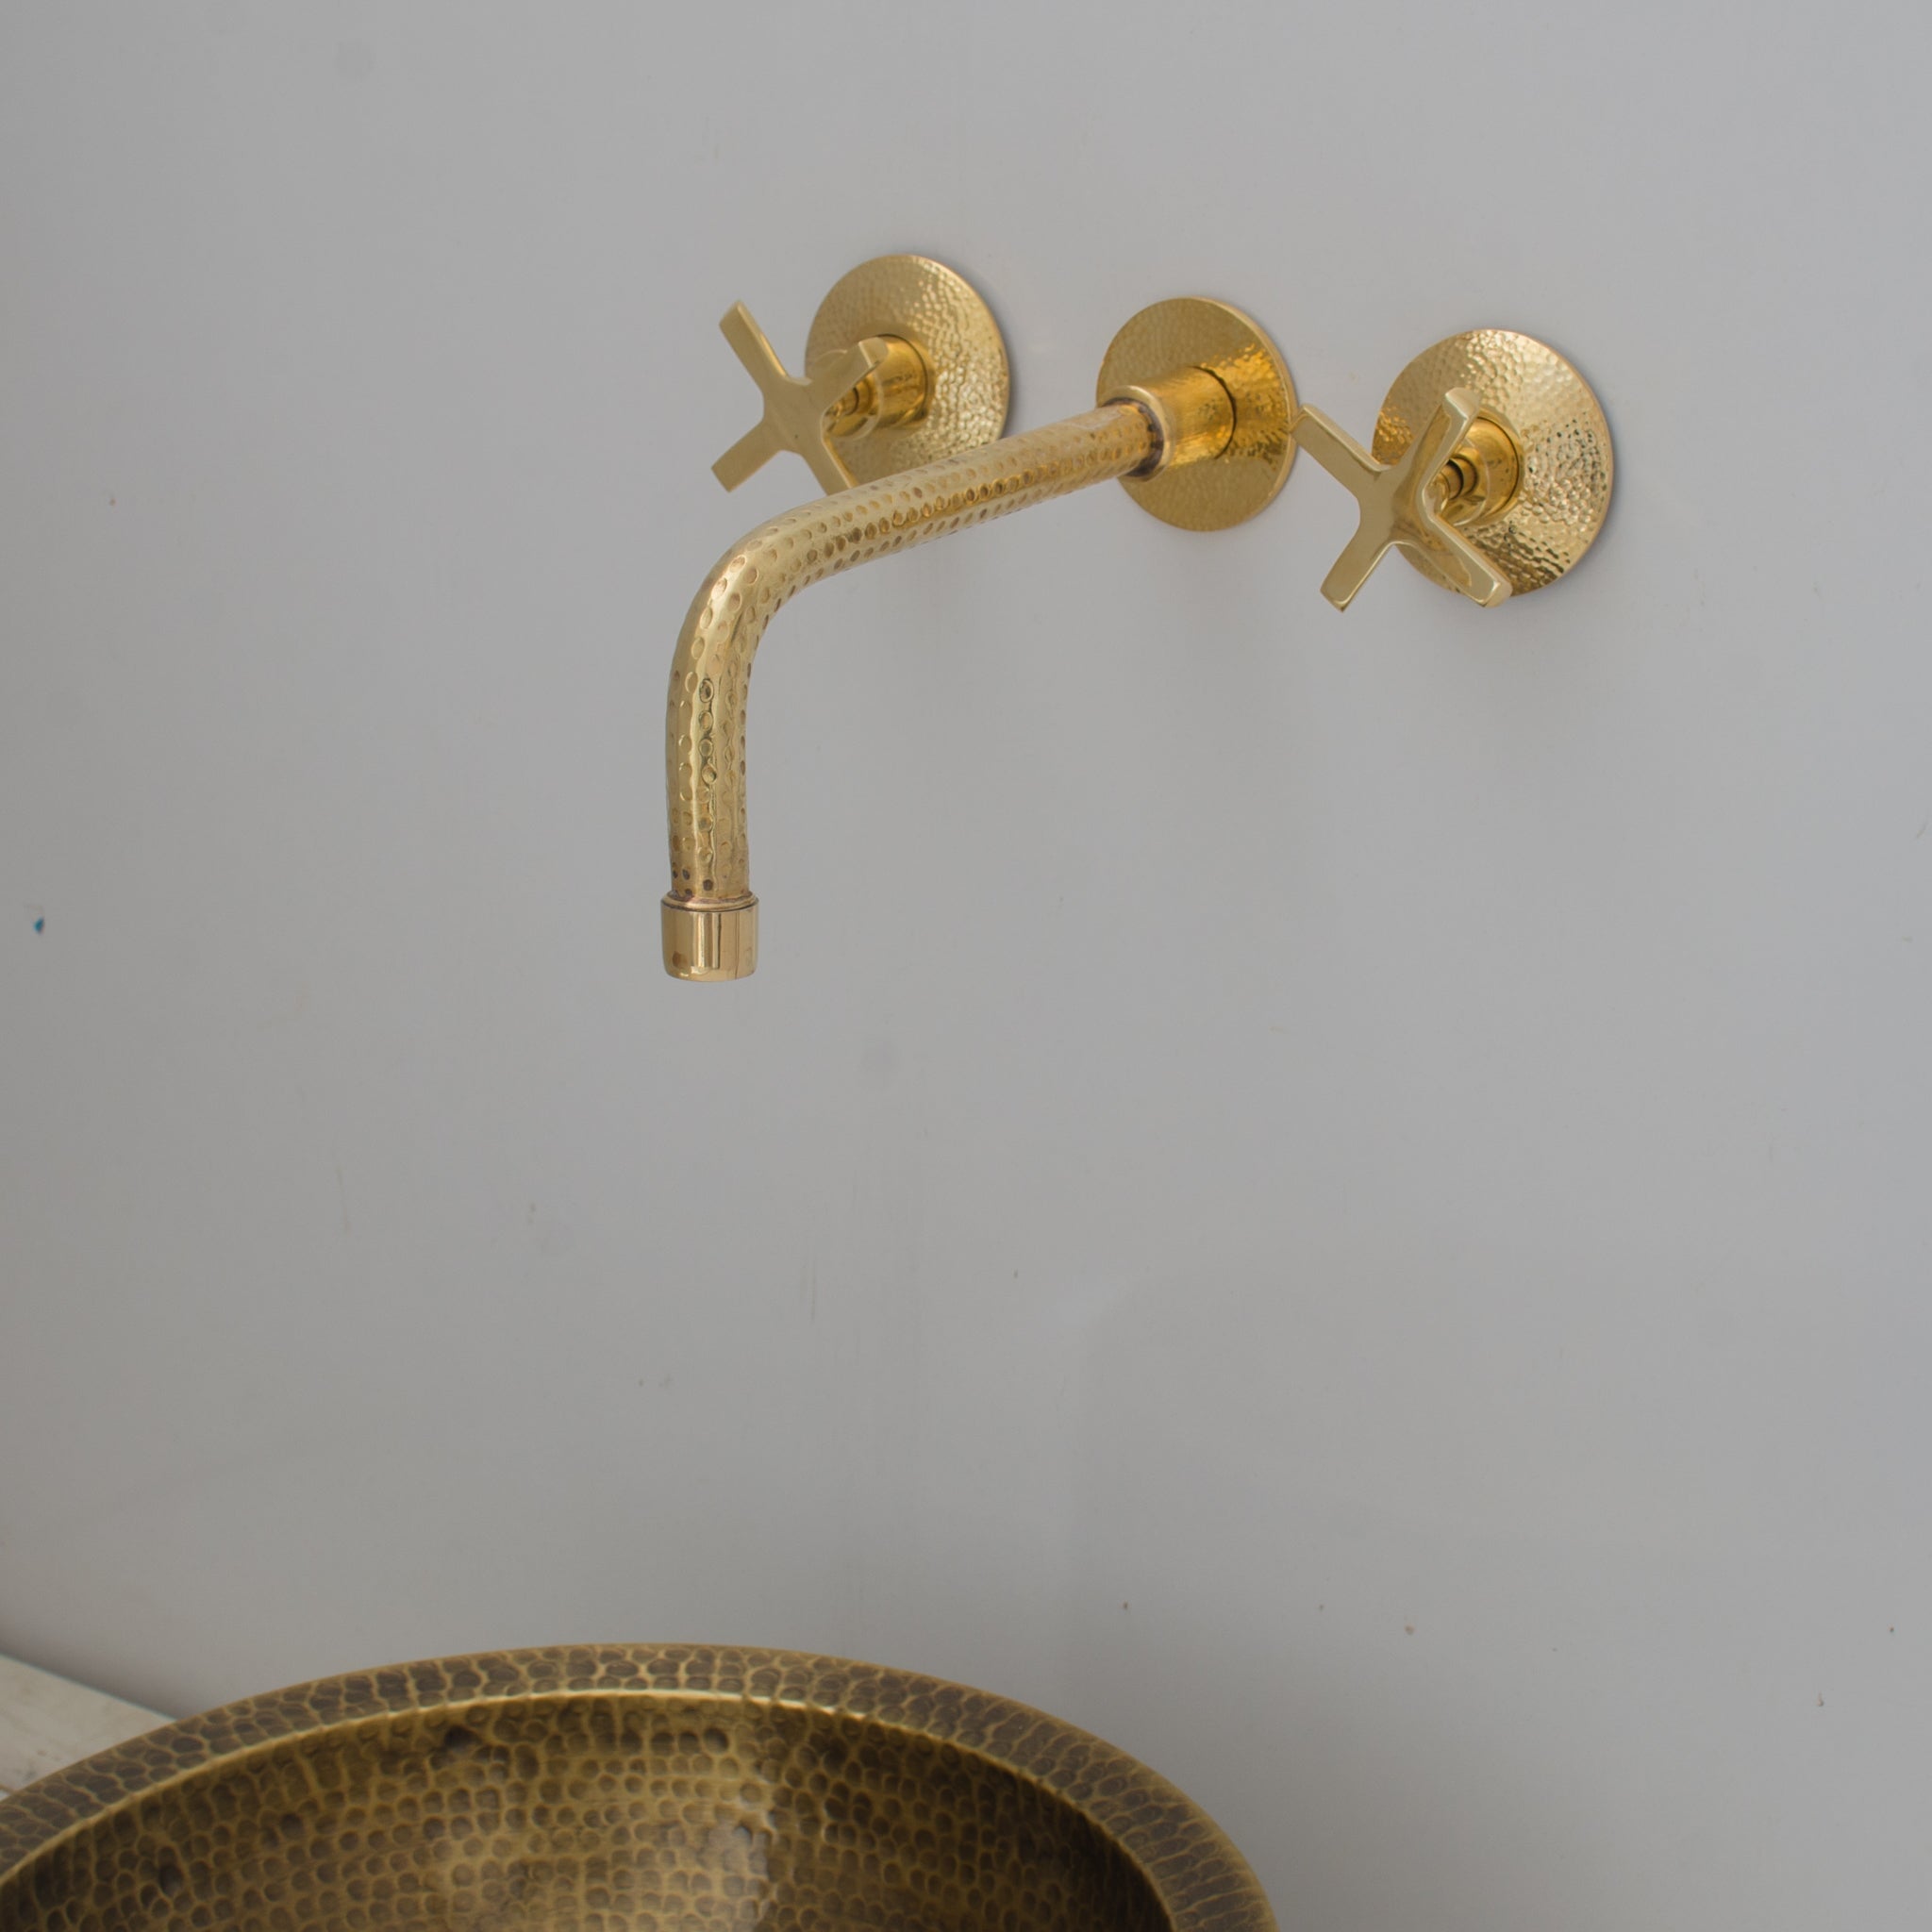 Hammered Brass - Vintage Wall Mount Sink Faucet